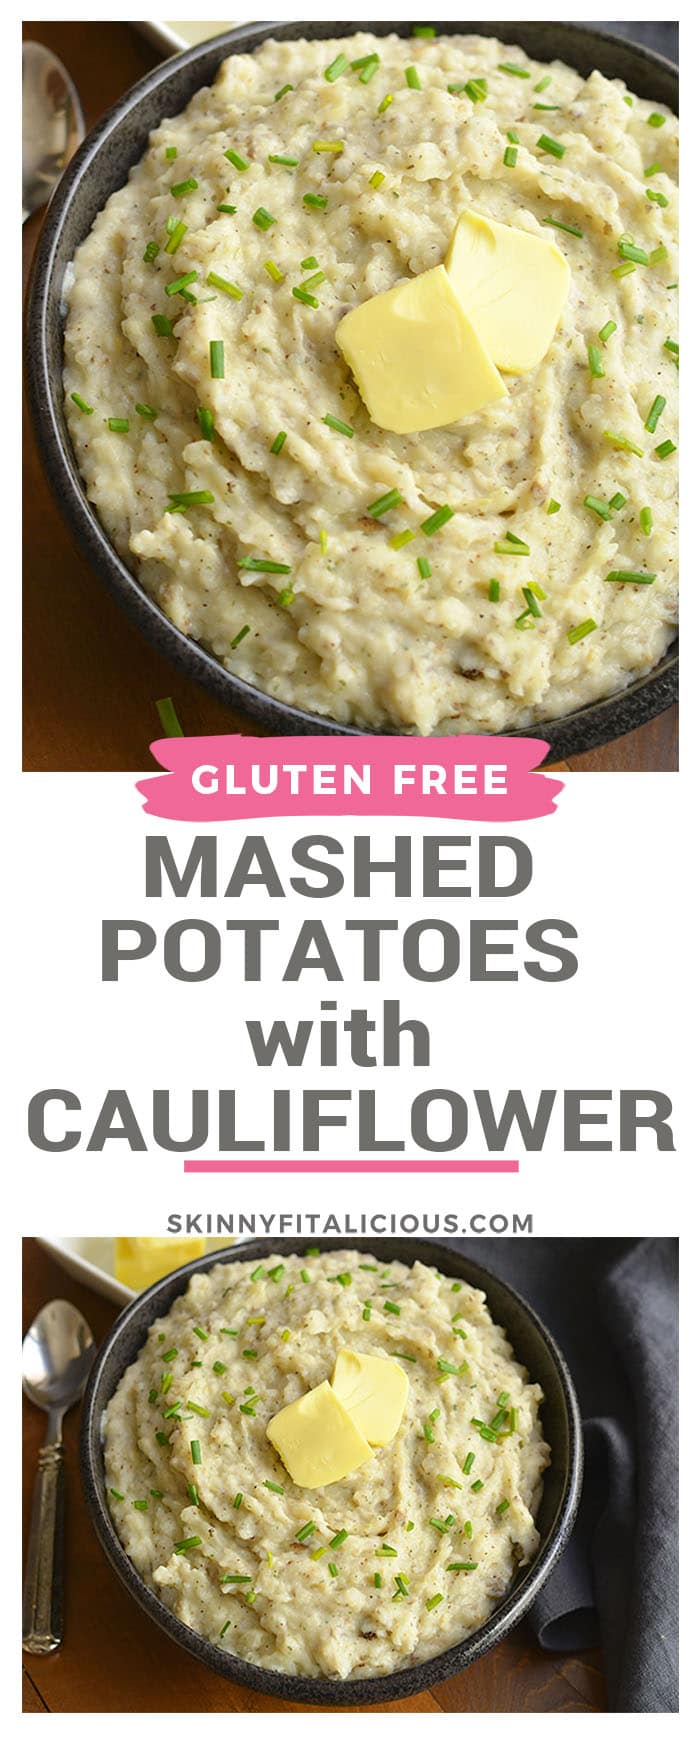 Healthier Mashed Potatoes & Cauliflower! This lighter version of the traditional dish adds cauliflower & Greek yogurt that no one will notice. A healthier side for your dinner table! Gluten Free + Low Calorie